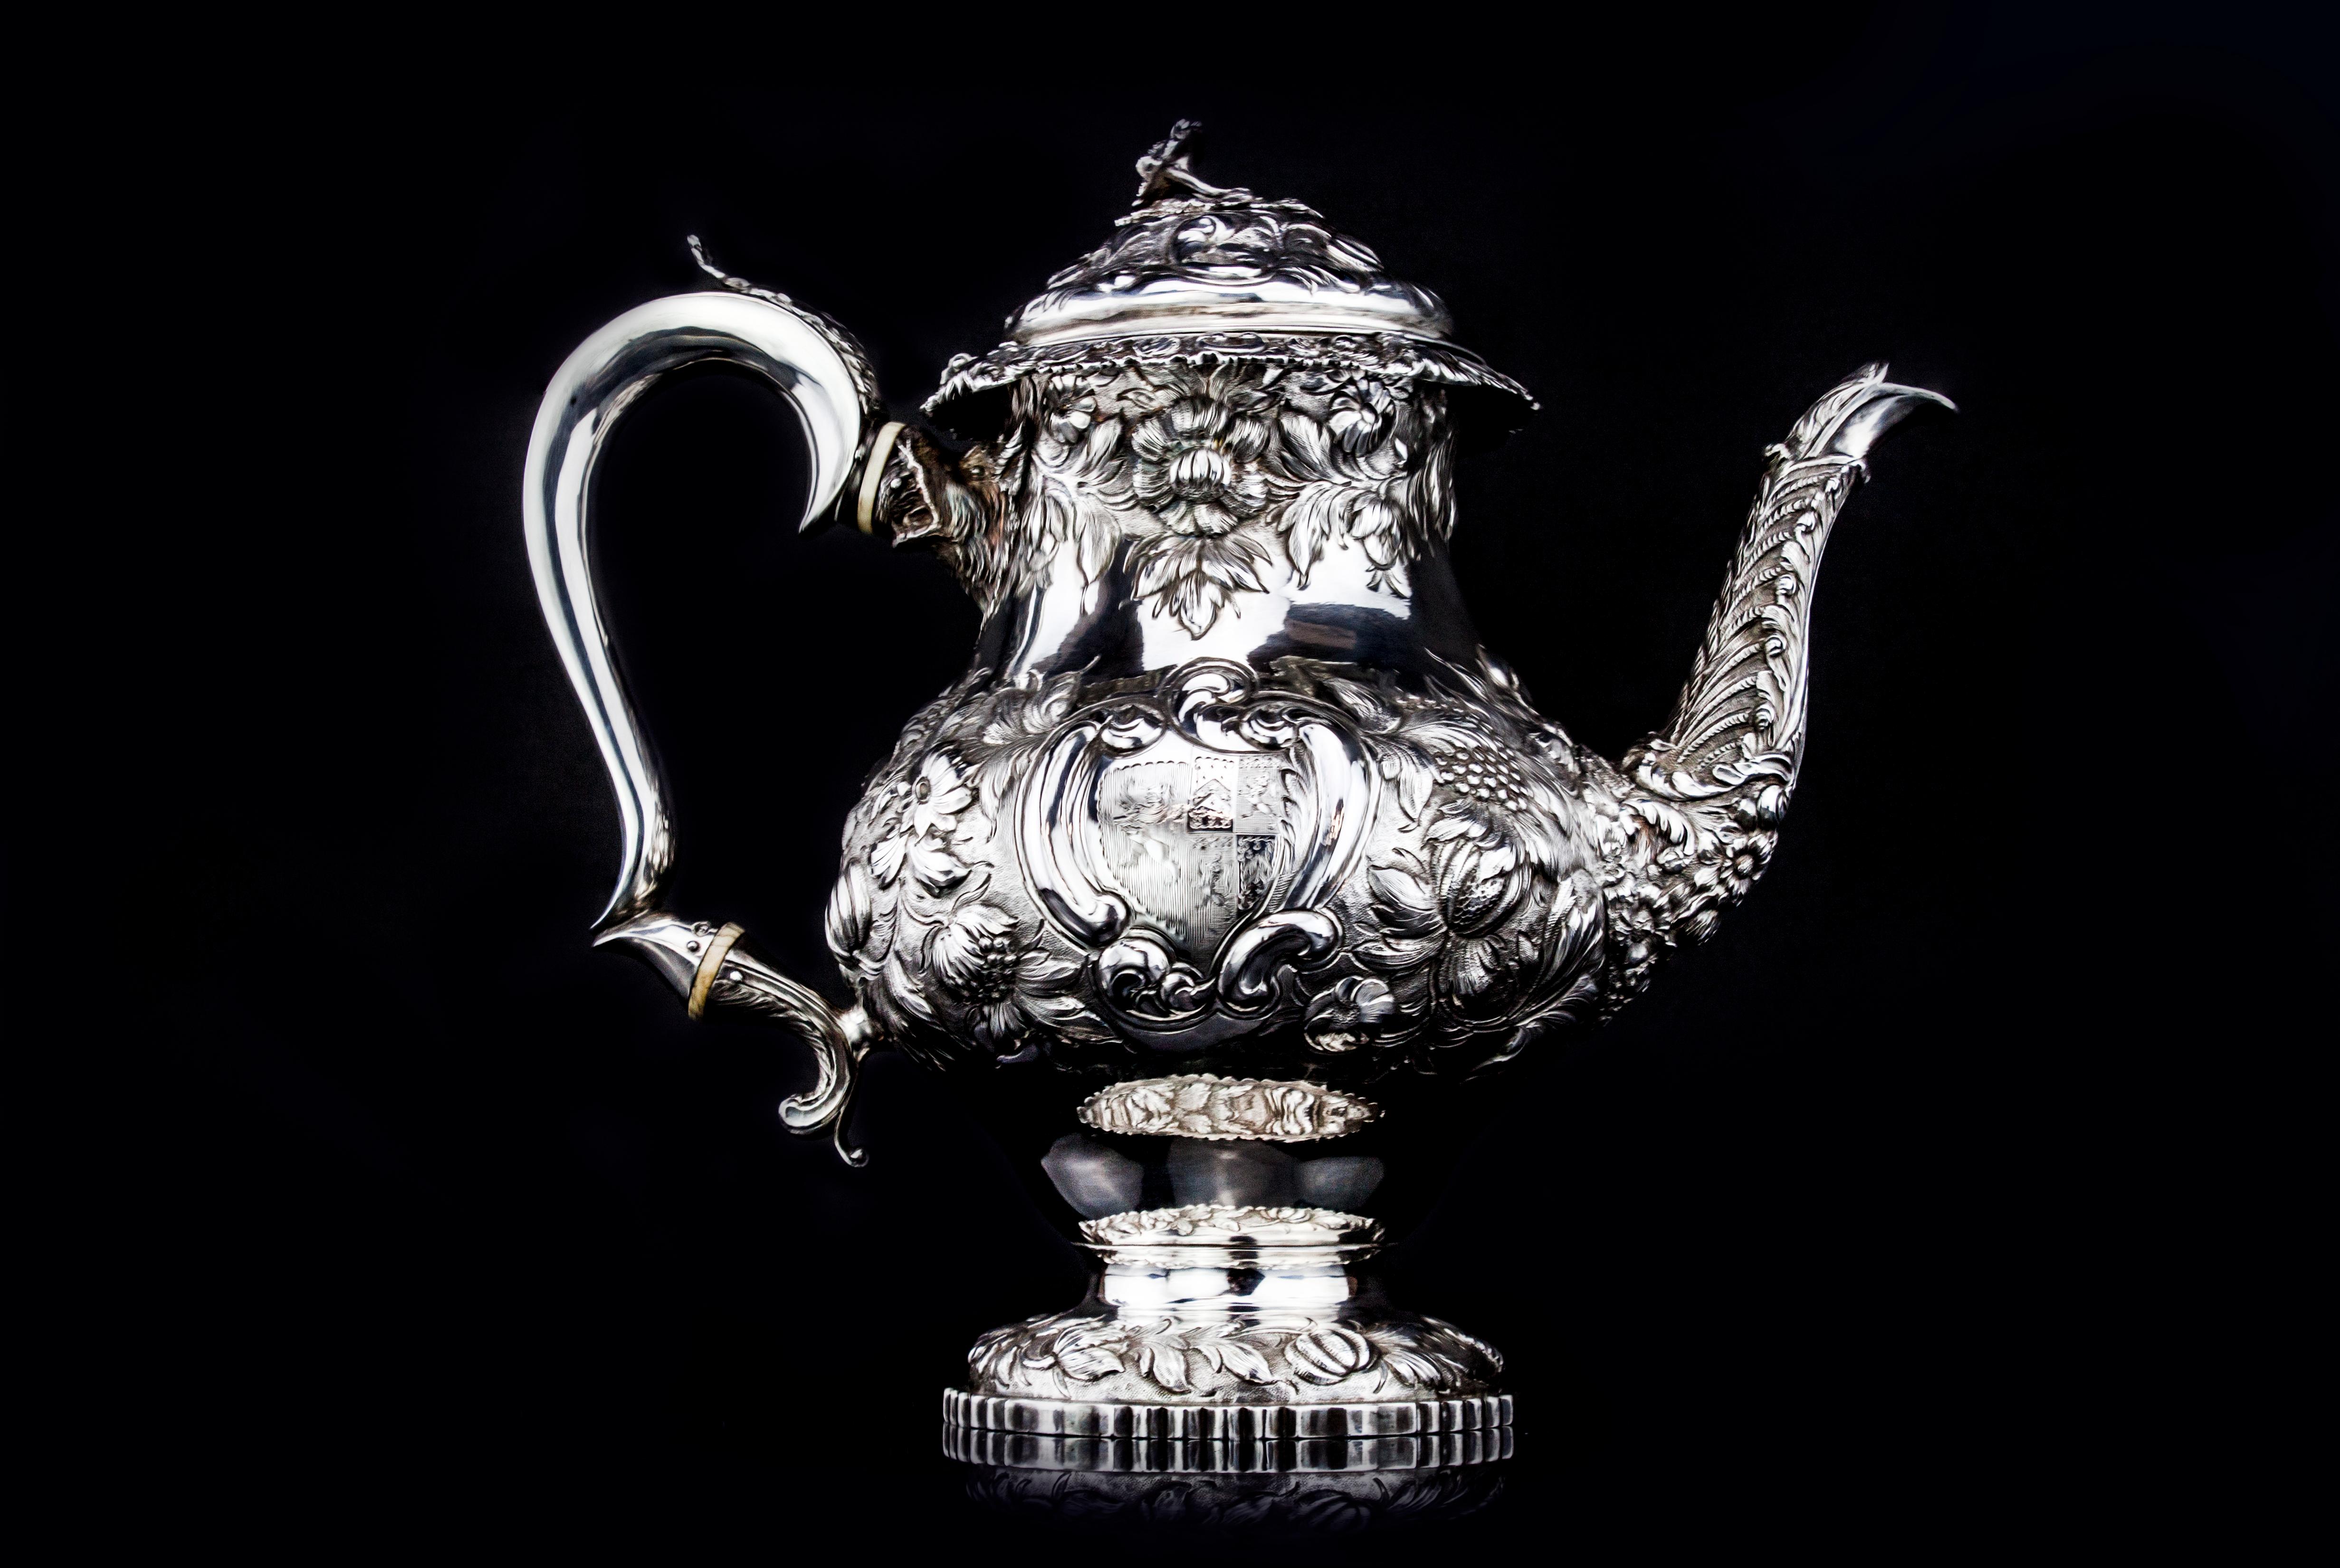 An impressive George IV period sterling silver tea pot
Maker: Charles Fox II
Made in England, London, 1823
Fully hallmarked.

Dimensions -
Approx size: 29 x 15 x 26 cm
Weight: 1097 grams


Please note handle is bone, not ivory.

Charles